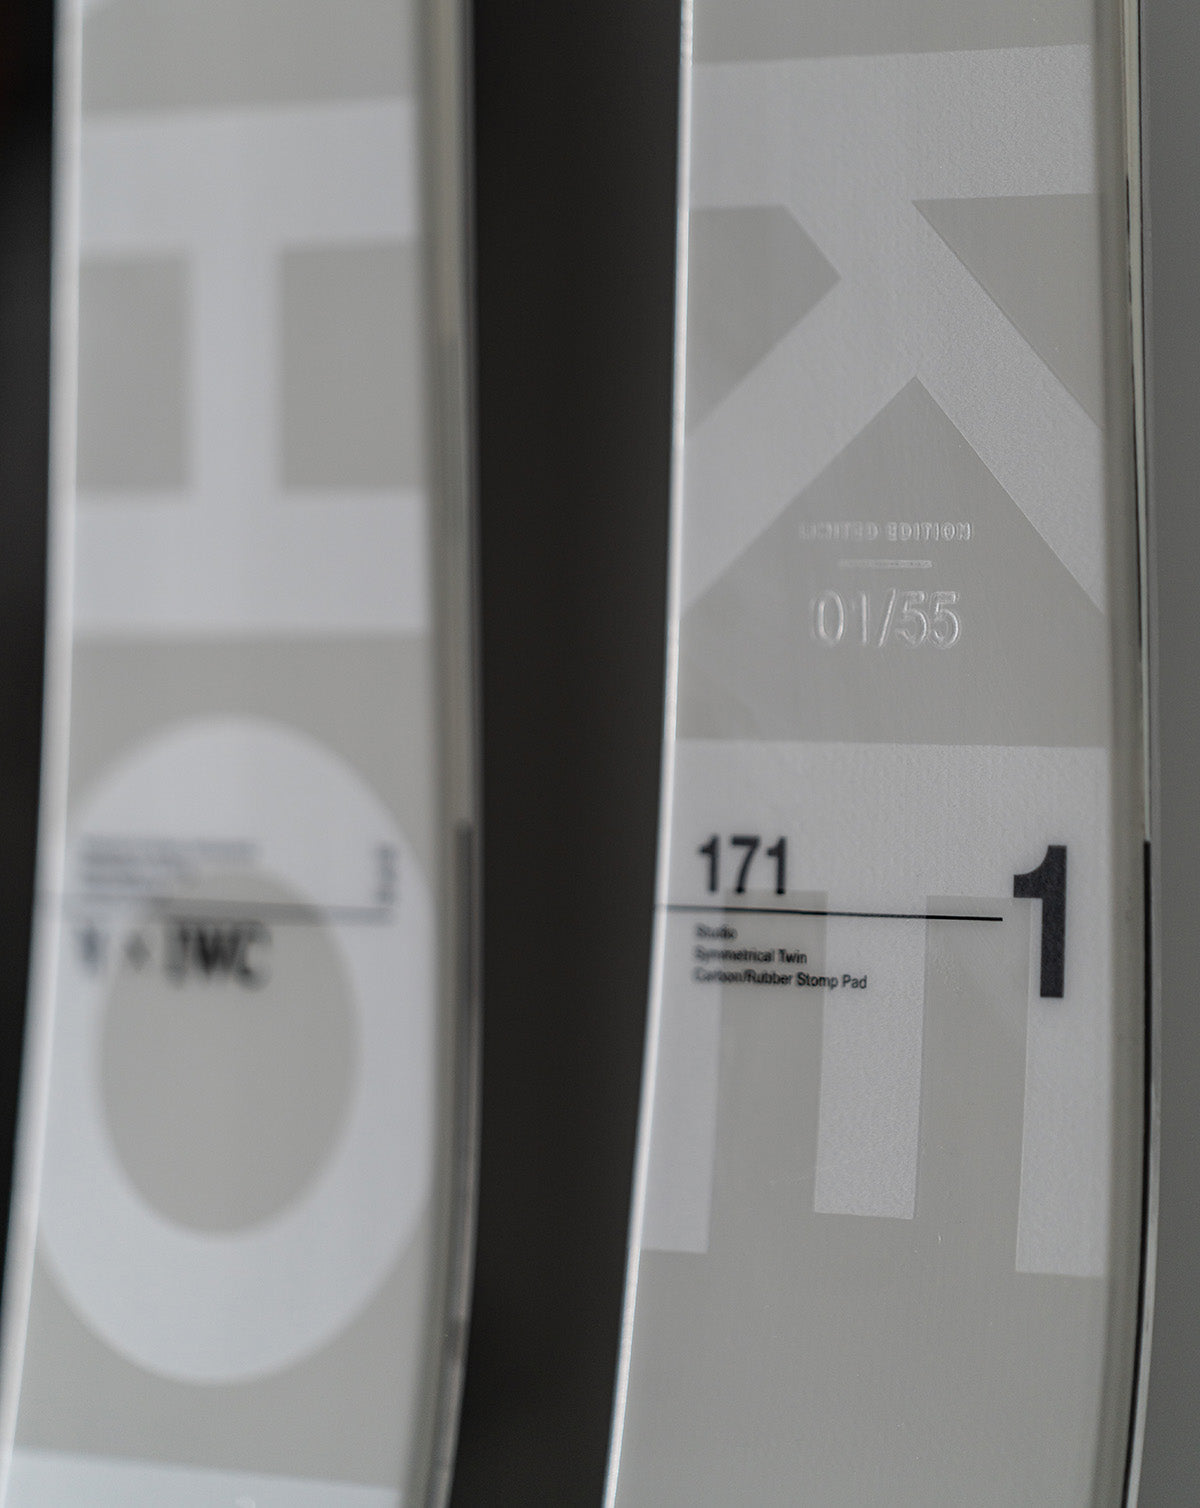 IWC Schaffhausen And Faction Skis Collaborate To Design Limited